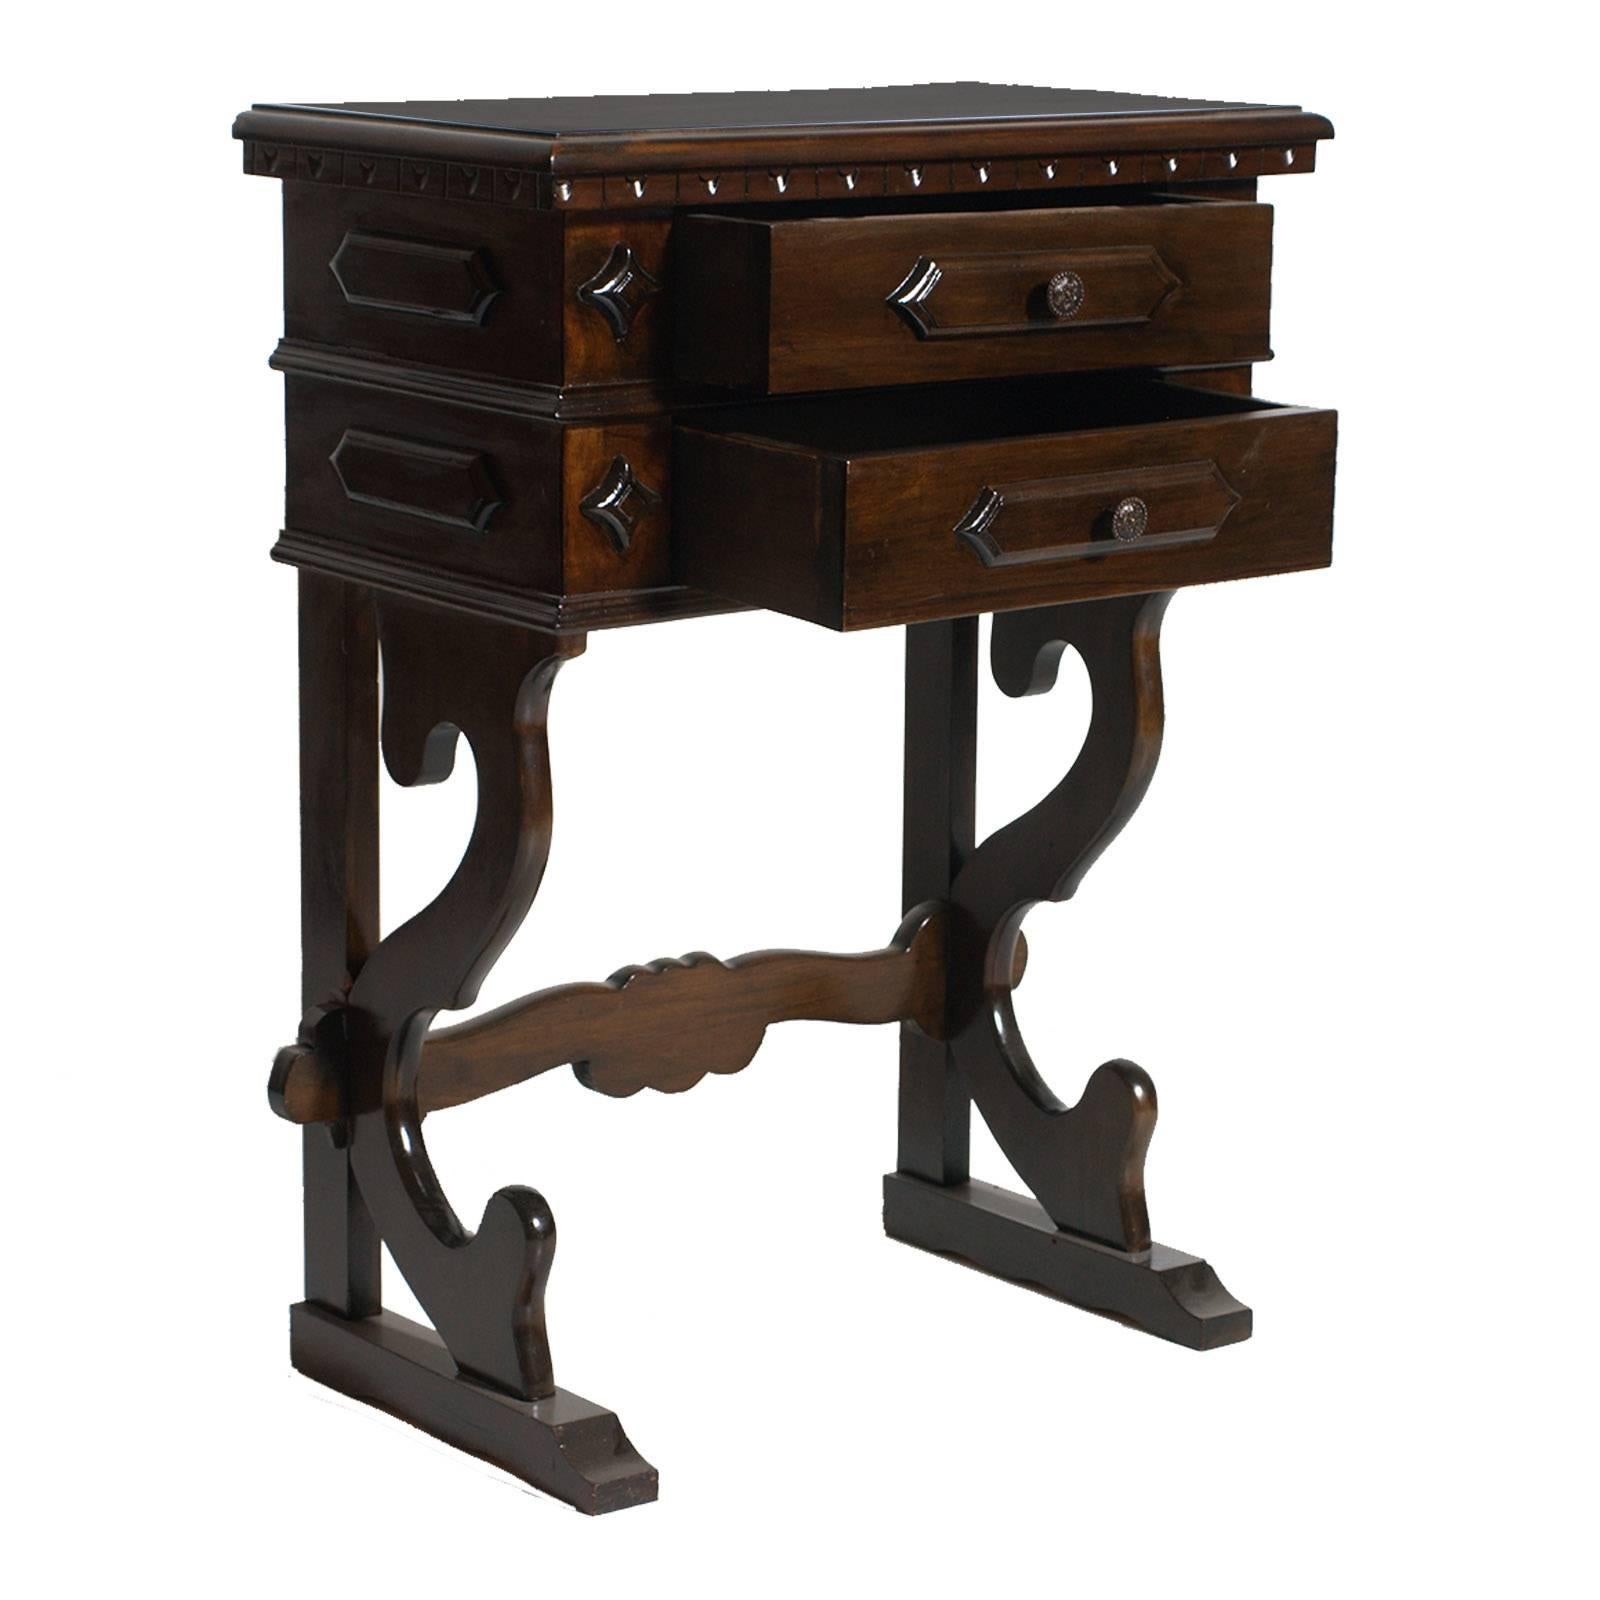 Mid-20th century Florentine Renaissance console or nighstand in walnut, restored and finished to wax
Cabinetmaker: Bonciani, -Cascina- Tuscany.

Measure cm: H 75, W 55, D 30.